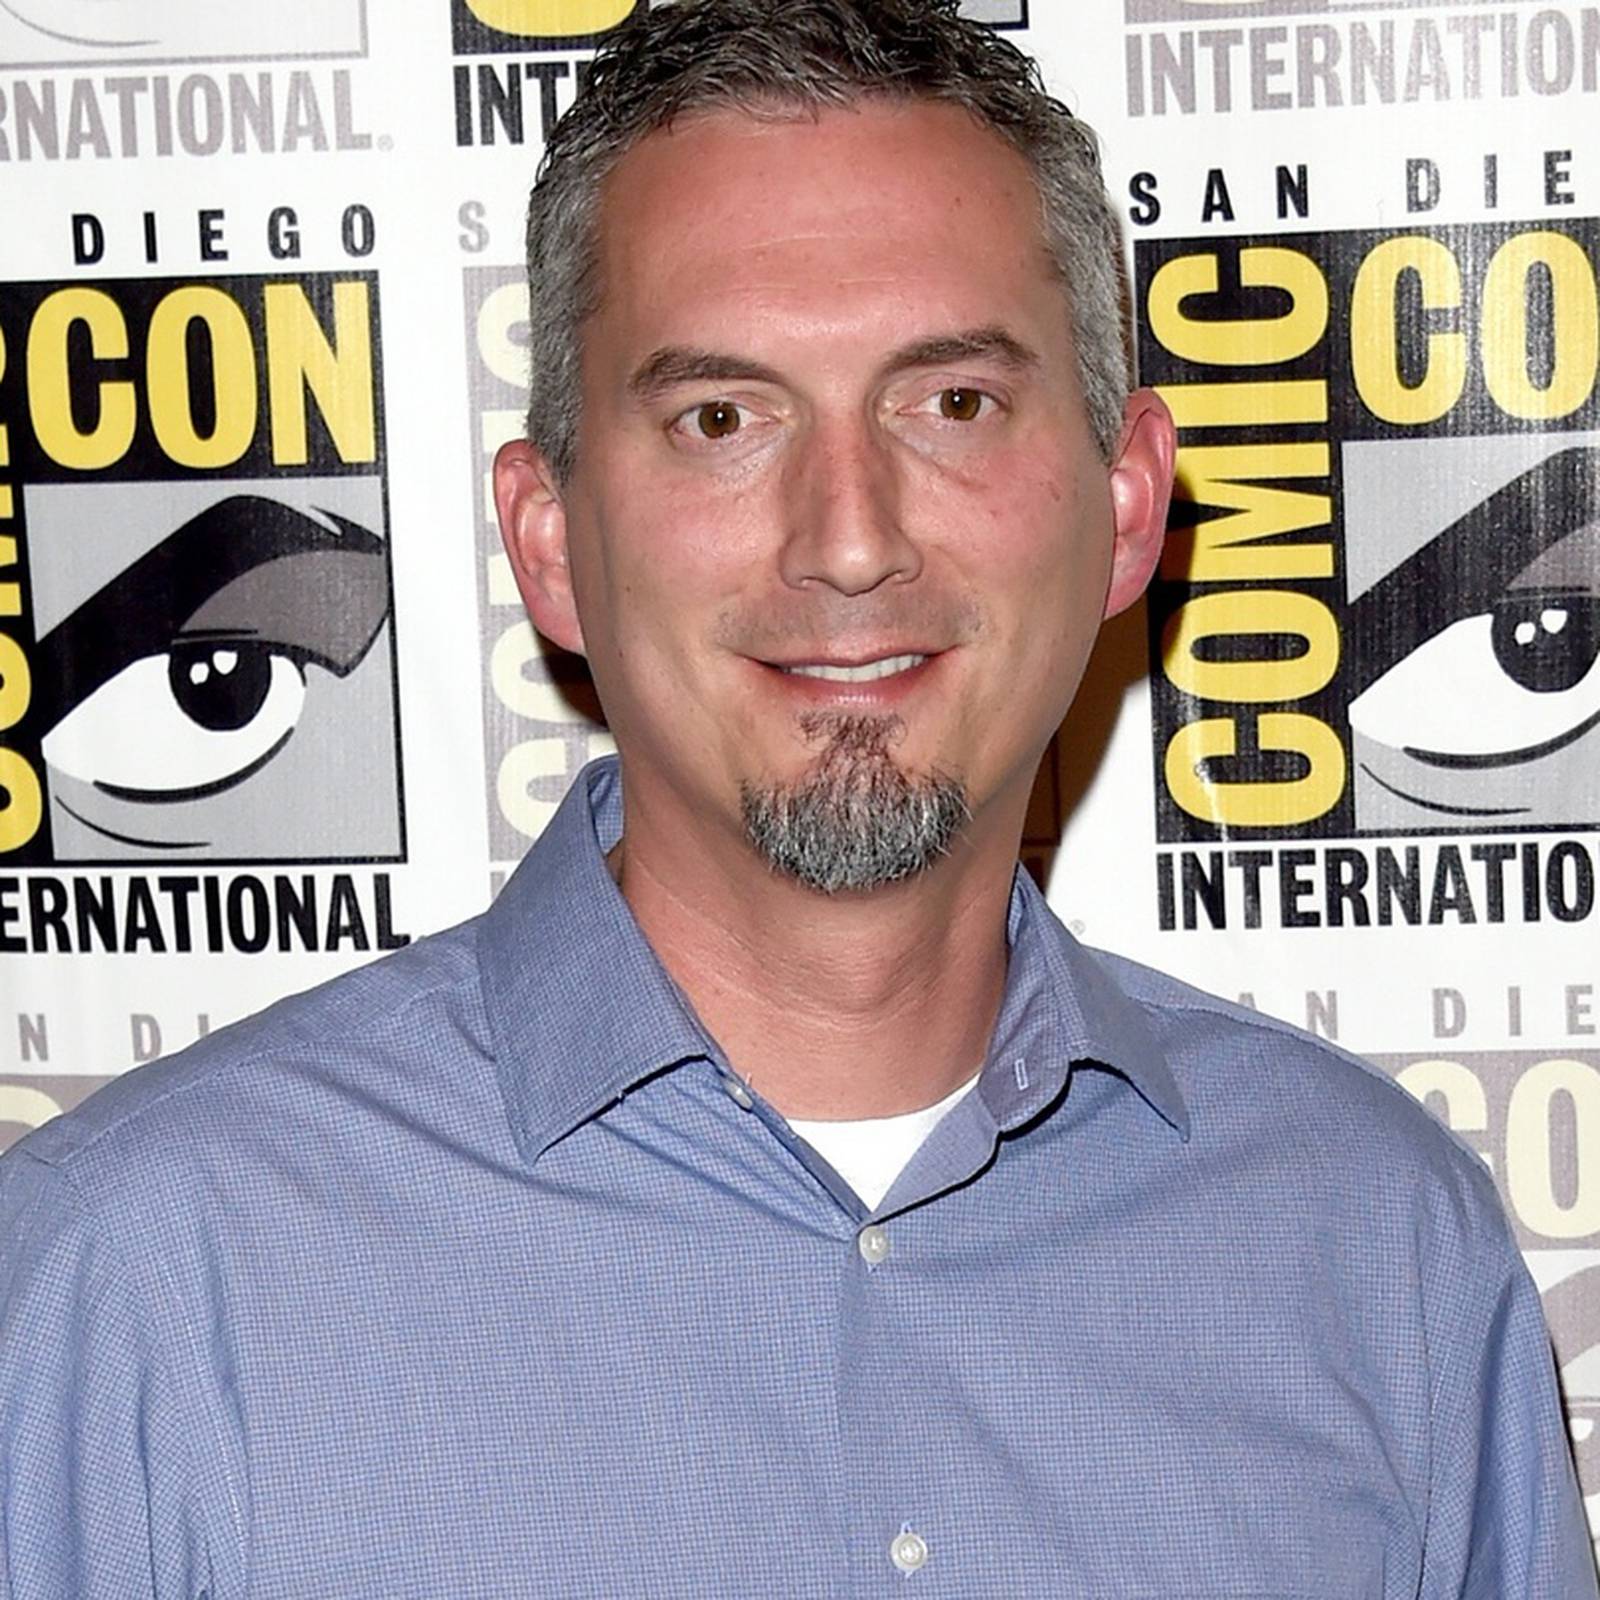 Maze Runner author James Dashner reveals all about his new book and the  backlash after [spoiler]'s death - Mirror Online